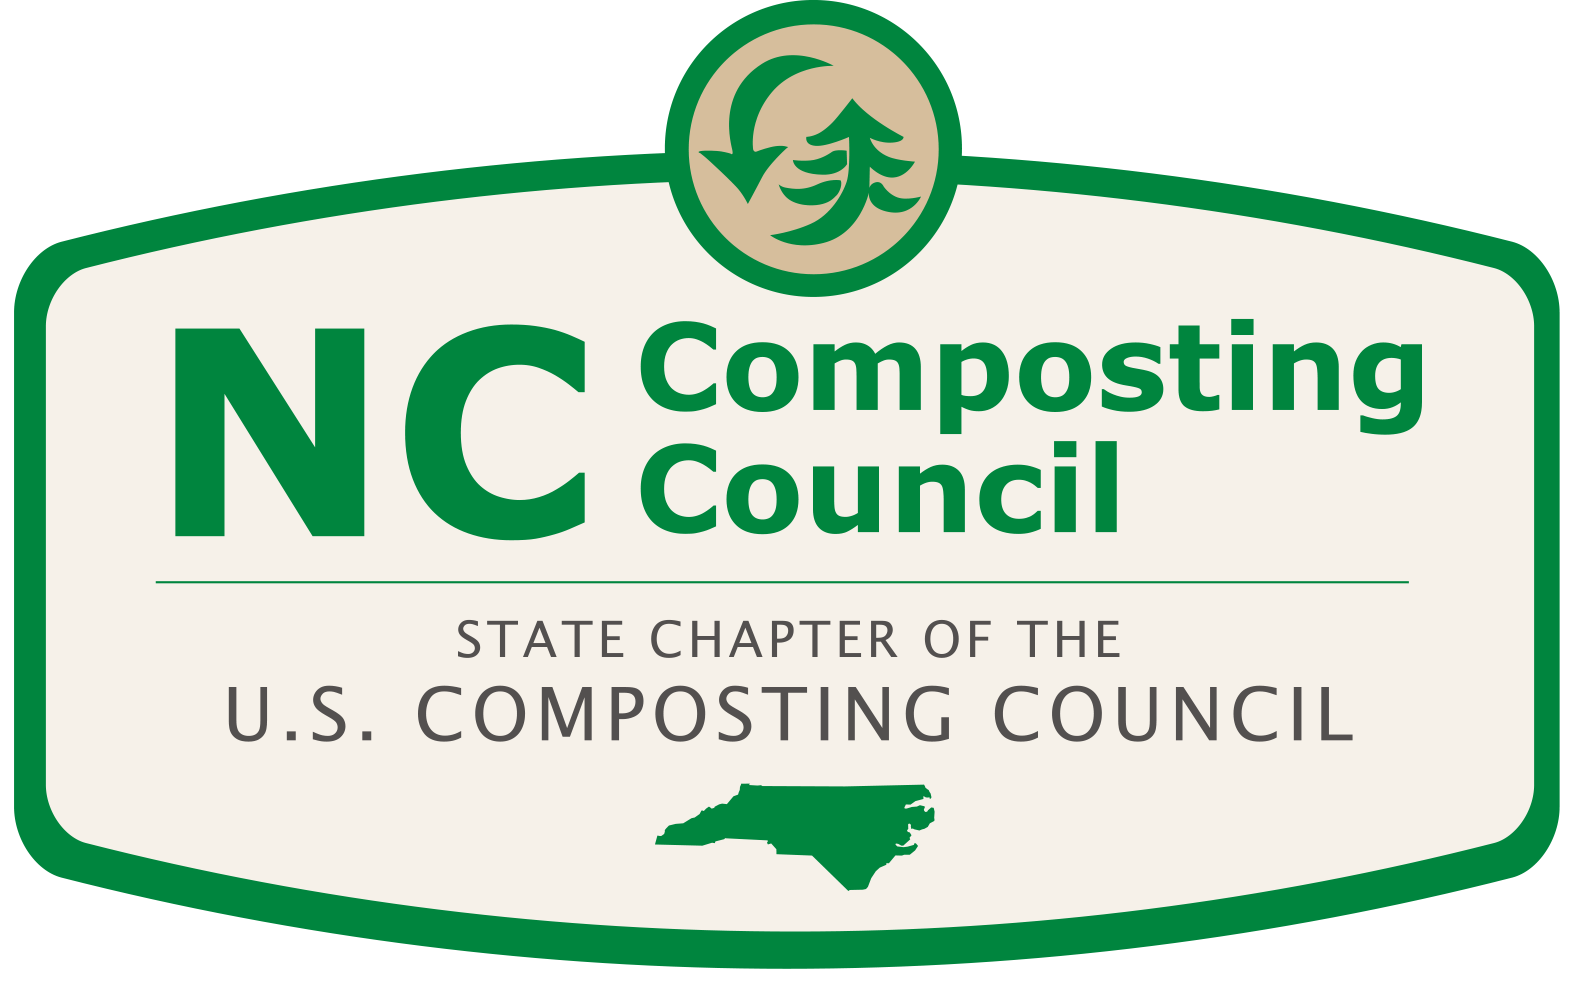 NC Composting Council - Booth #724